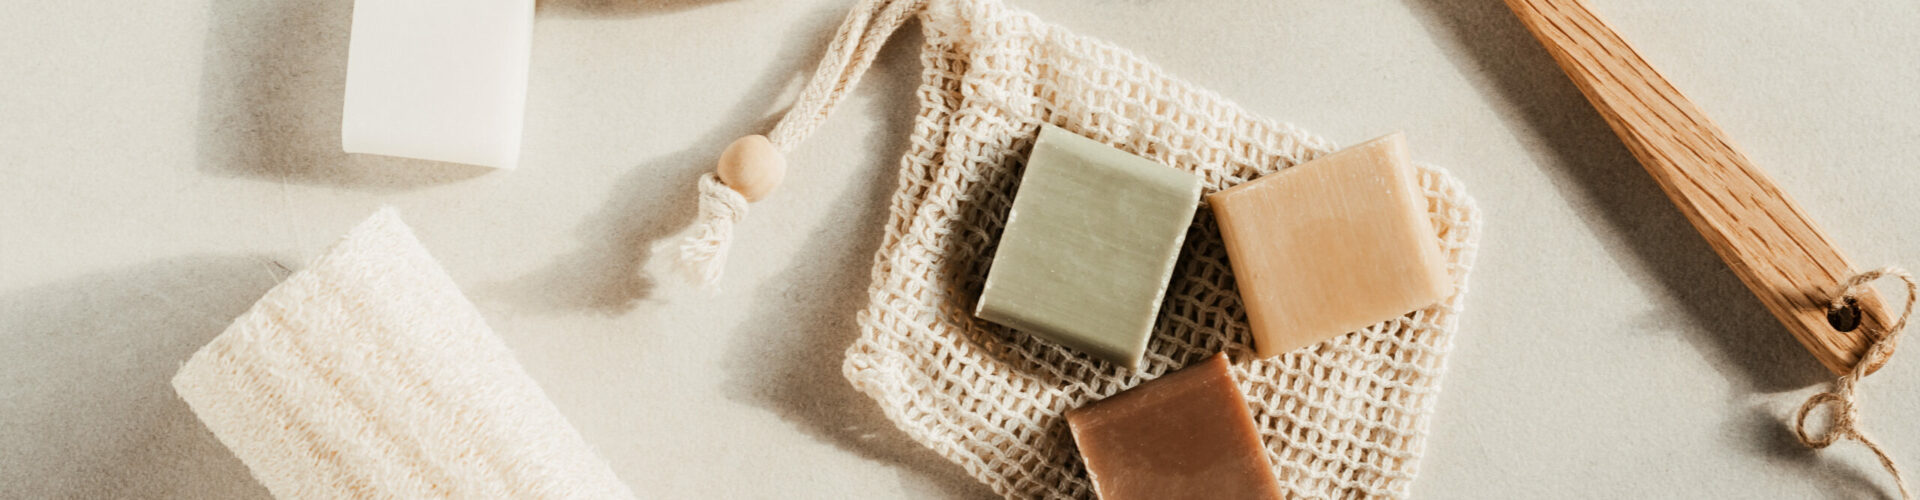 Handmade natural bar soaps. Ethical, sustainable zero waste lifestyle. DIY, hobby, artisan small business idea. Top view, mockup